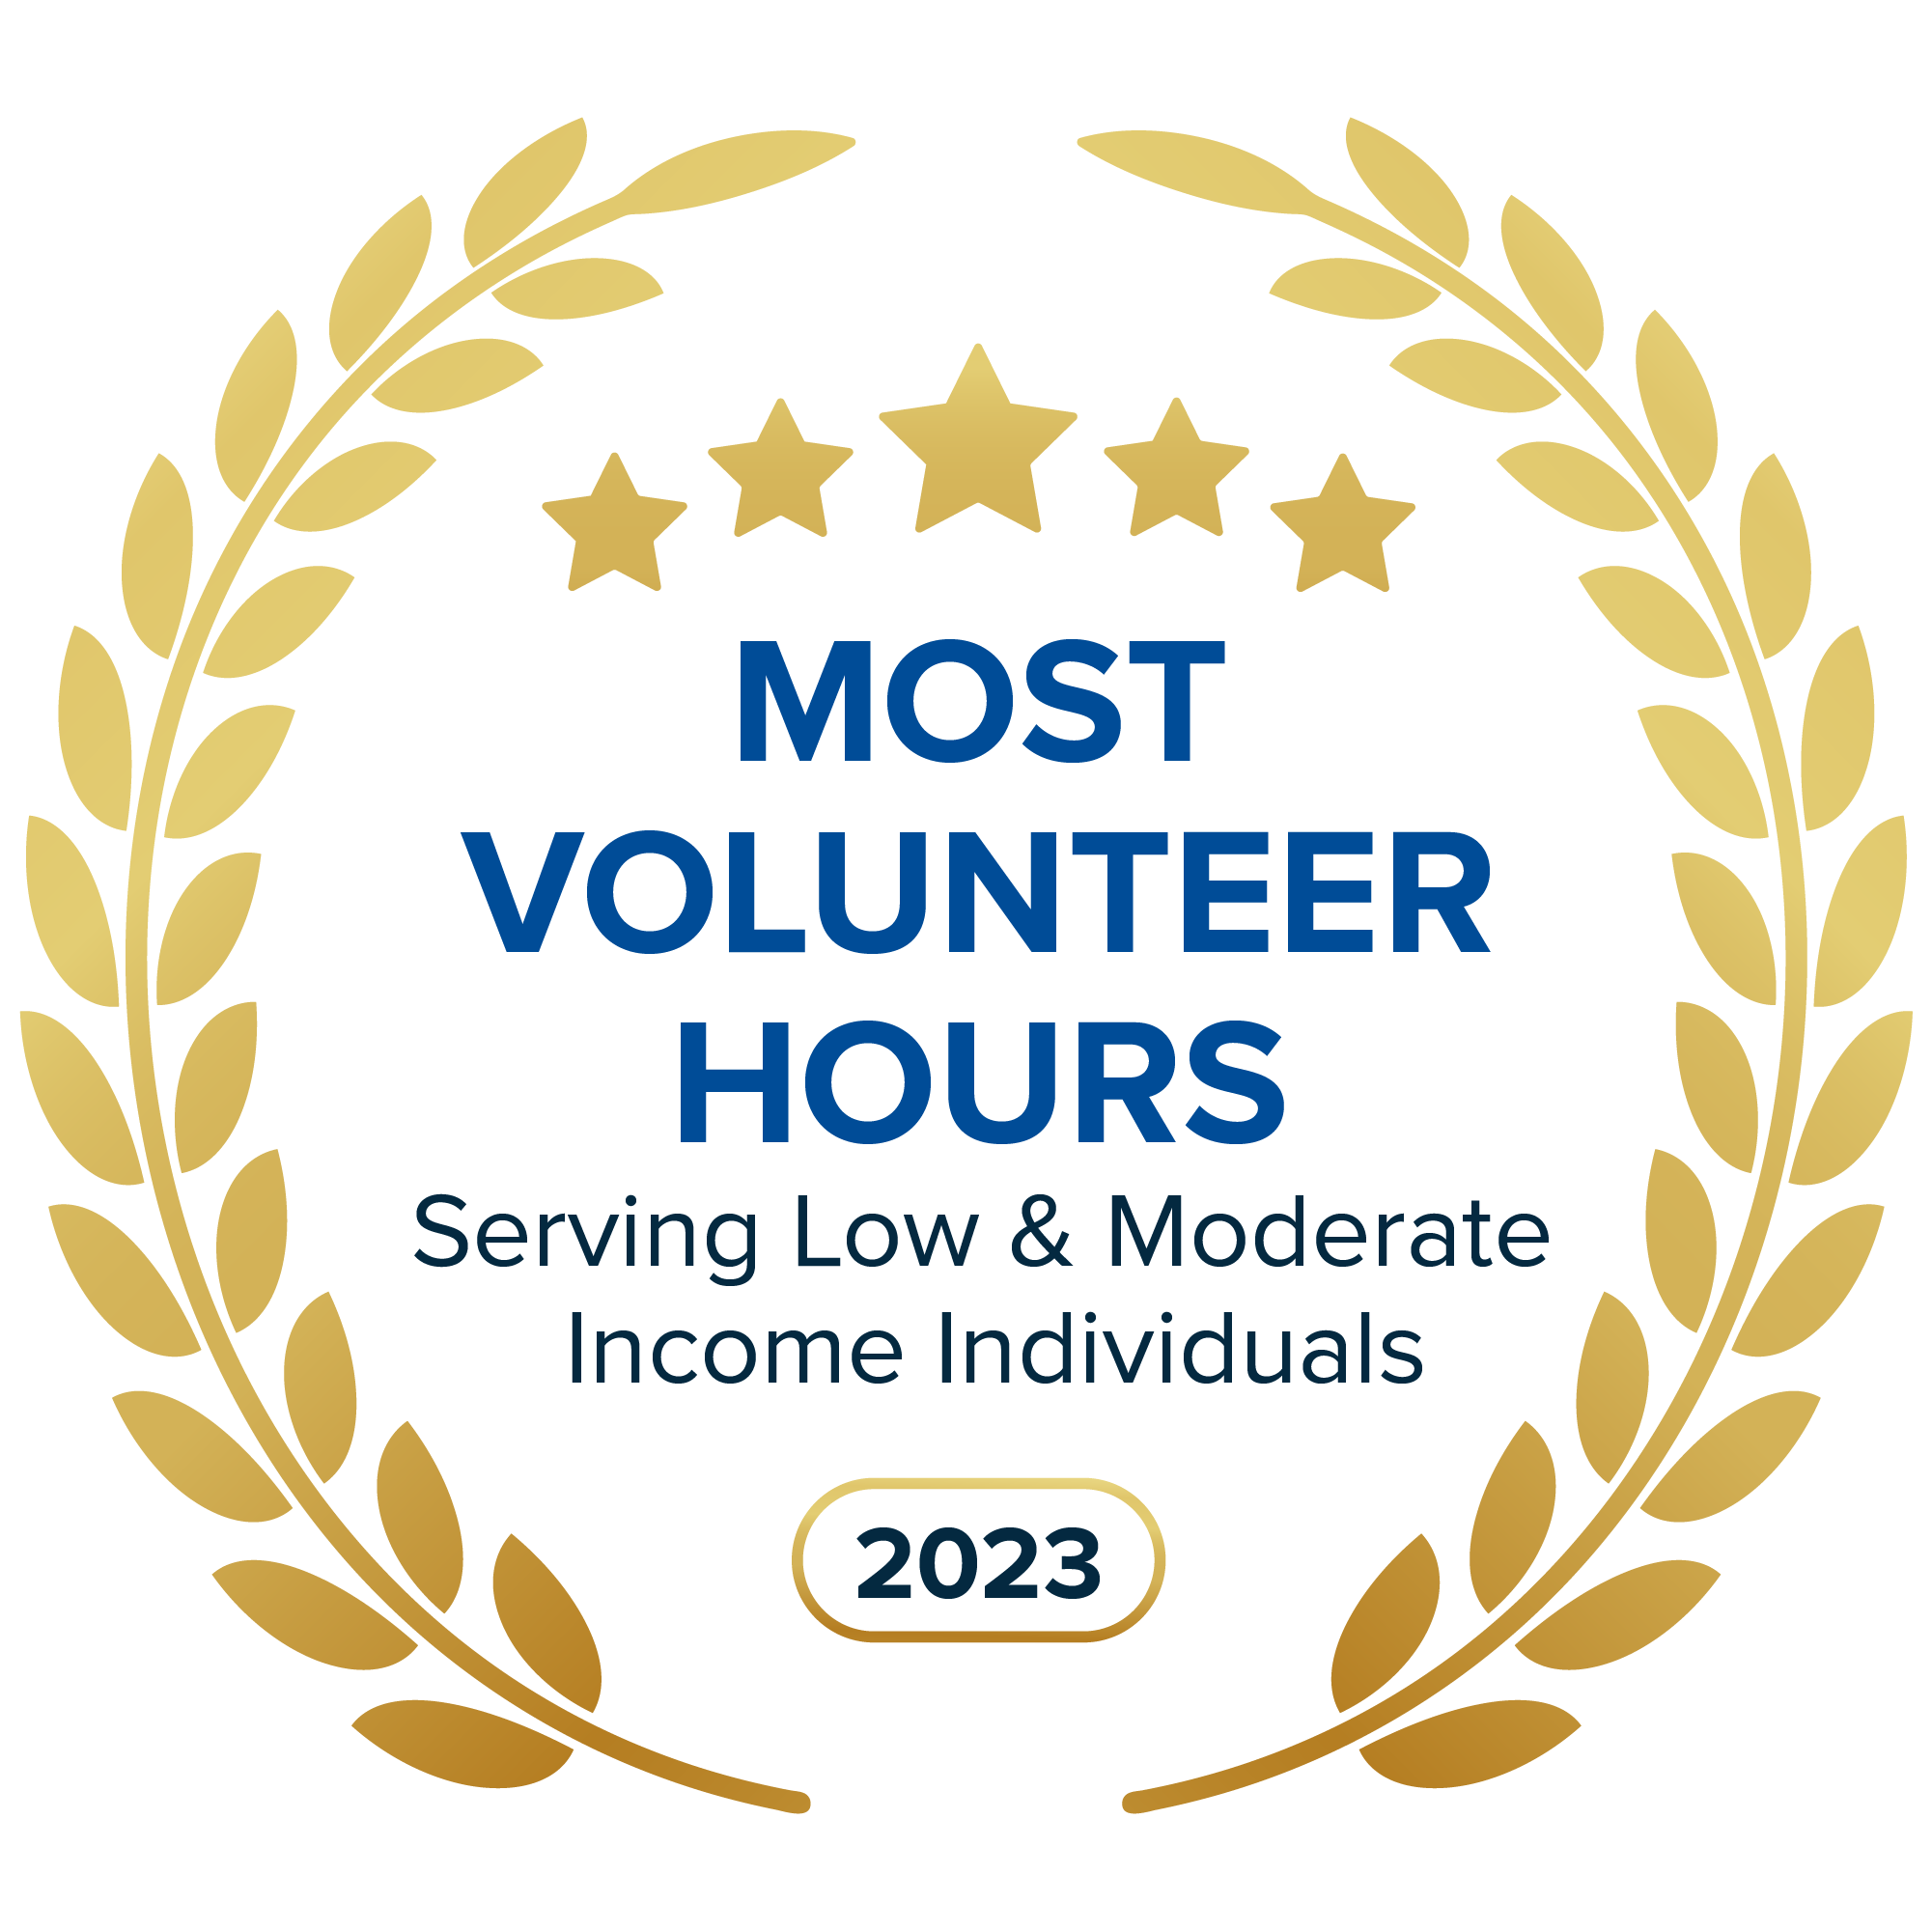 Most volunteer hours serving low and moderate income individuals